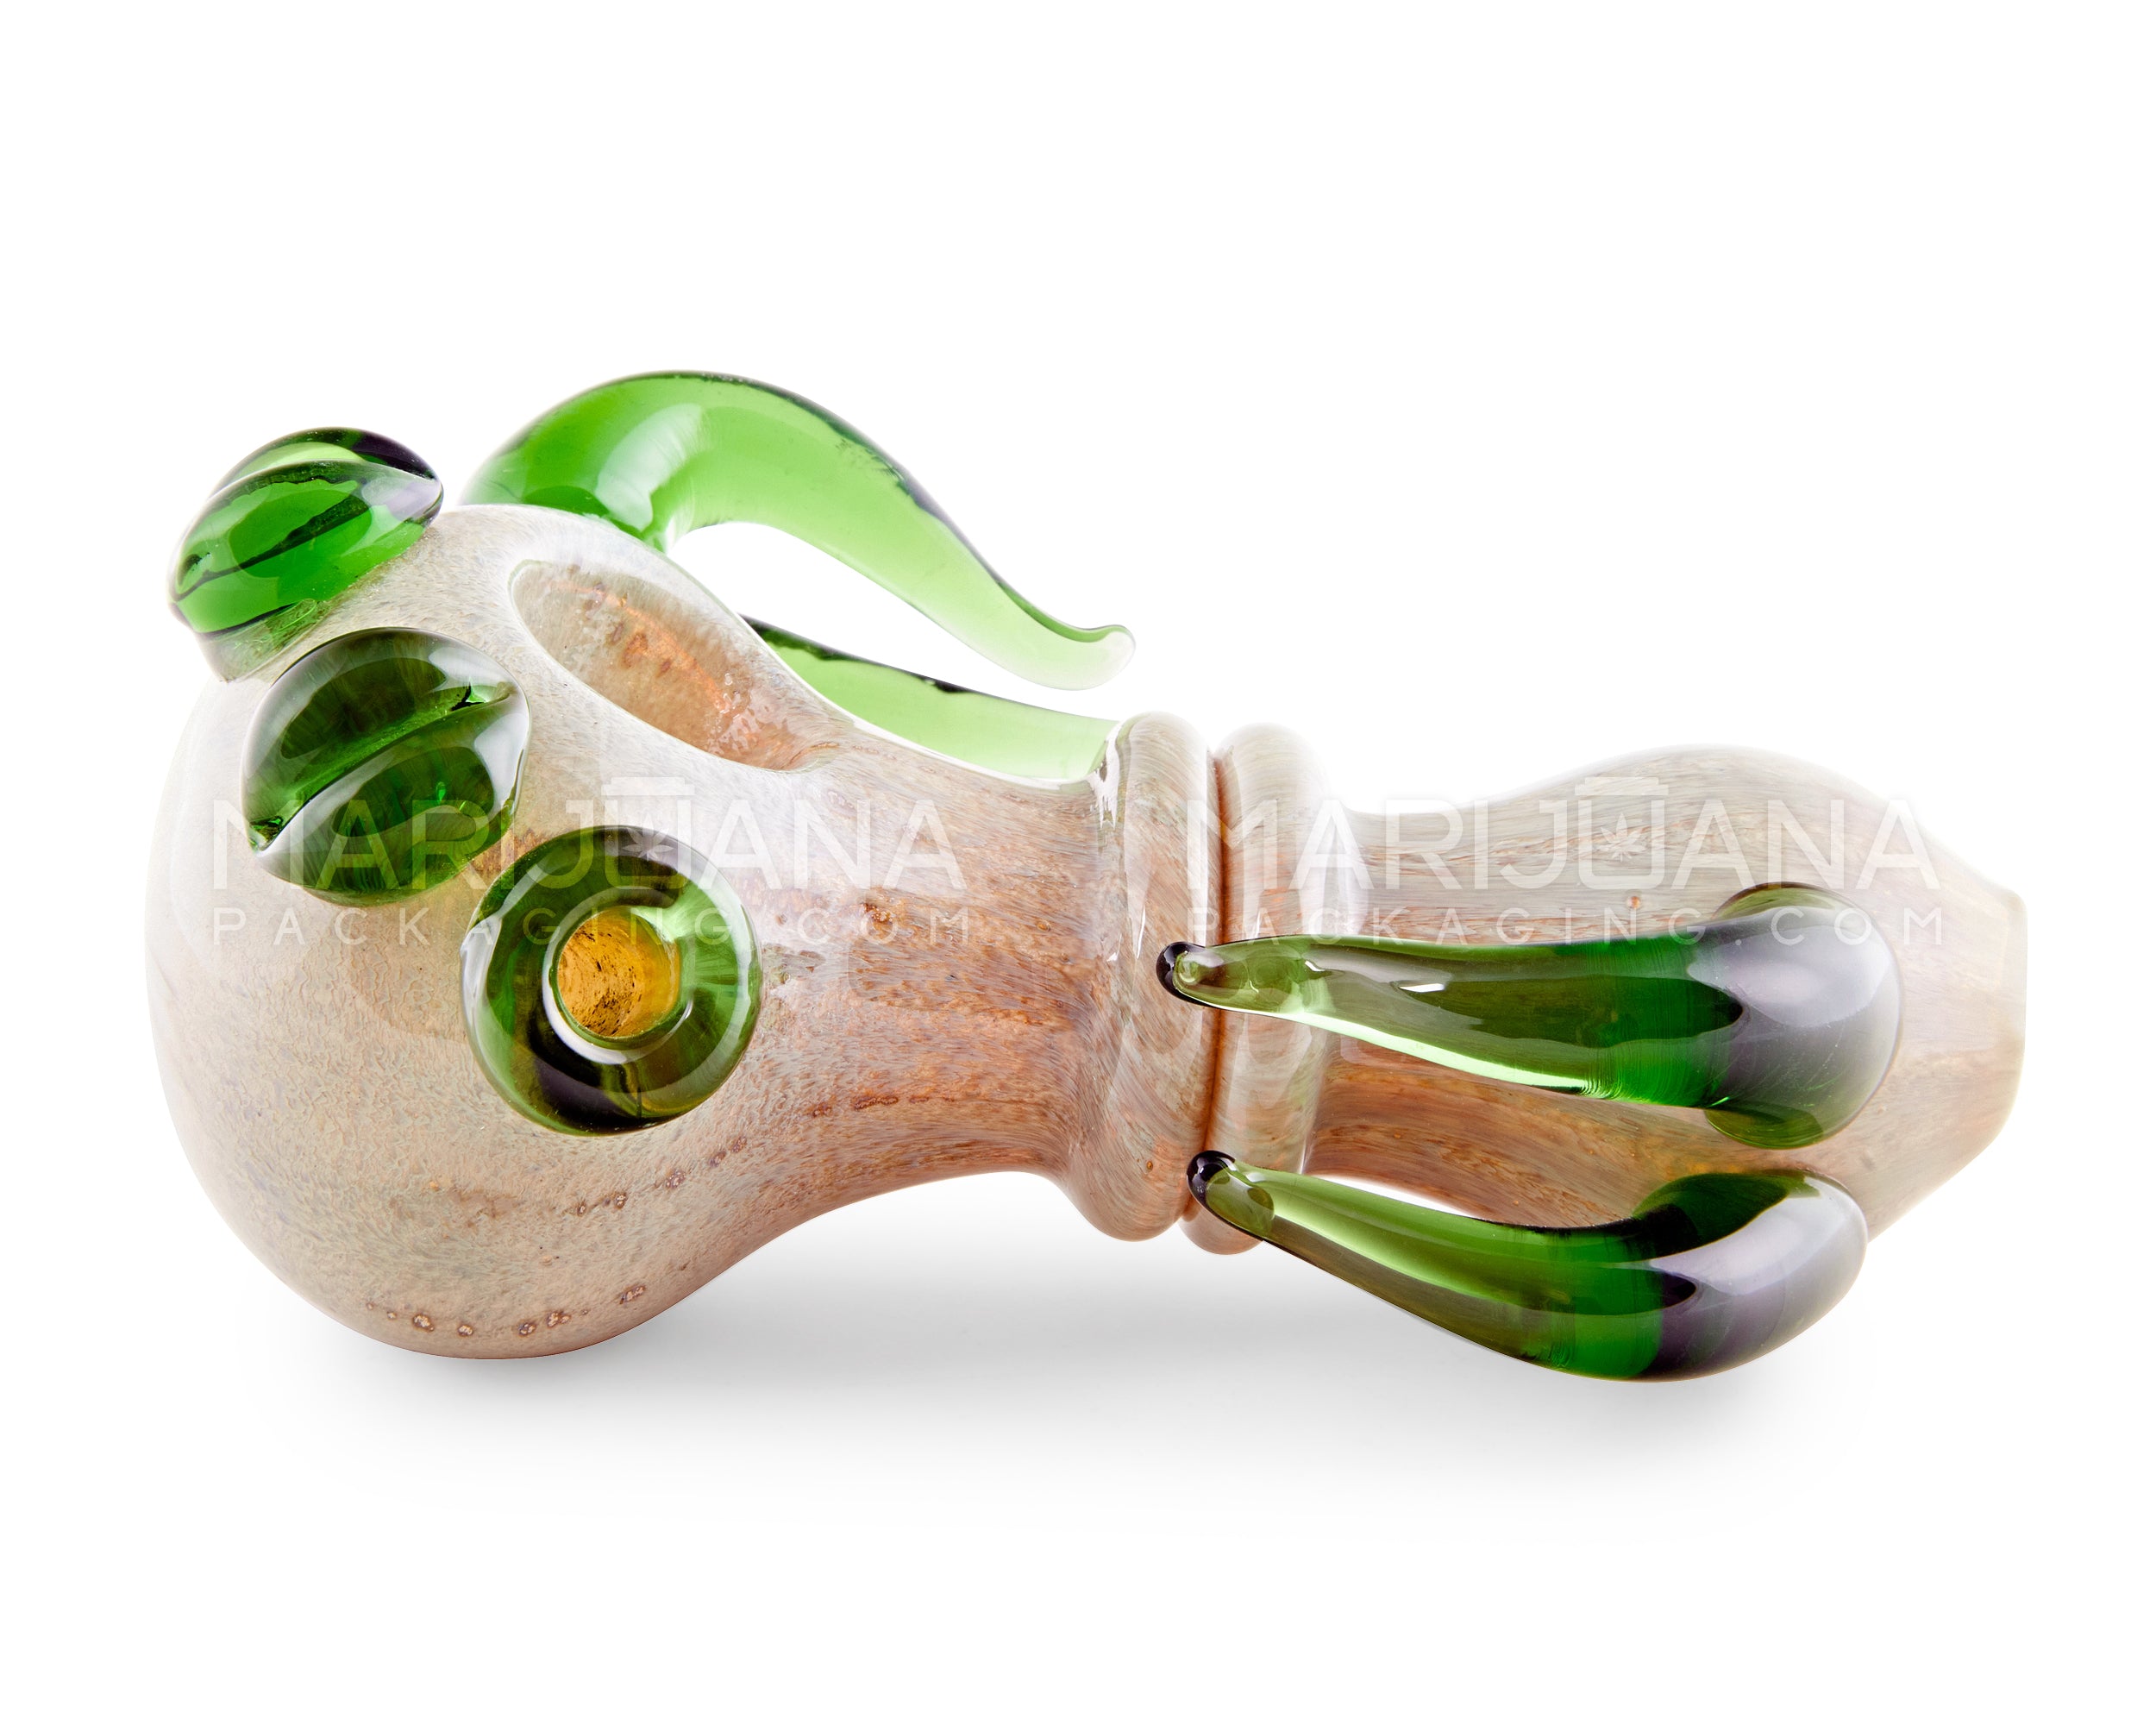 Frit Stone Spoon Hand Pipe w/ Multi Horn Accents | 4.5in Long - Glass - Assorted